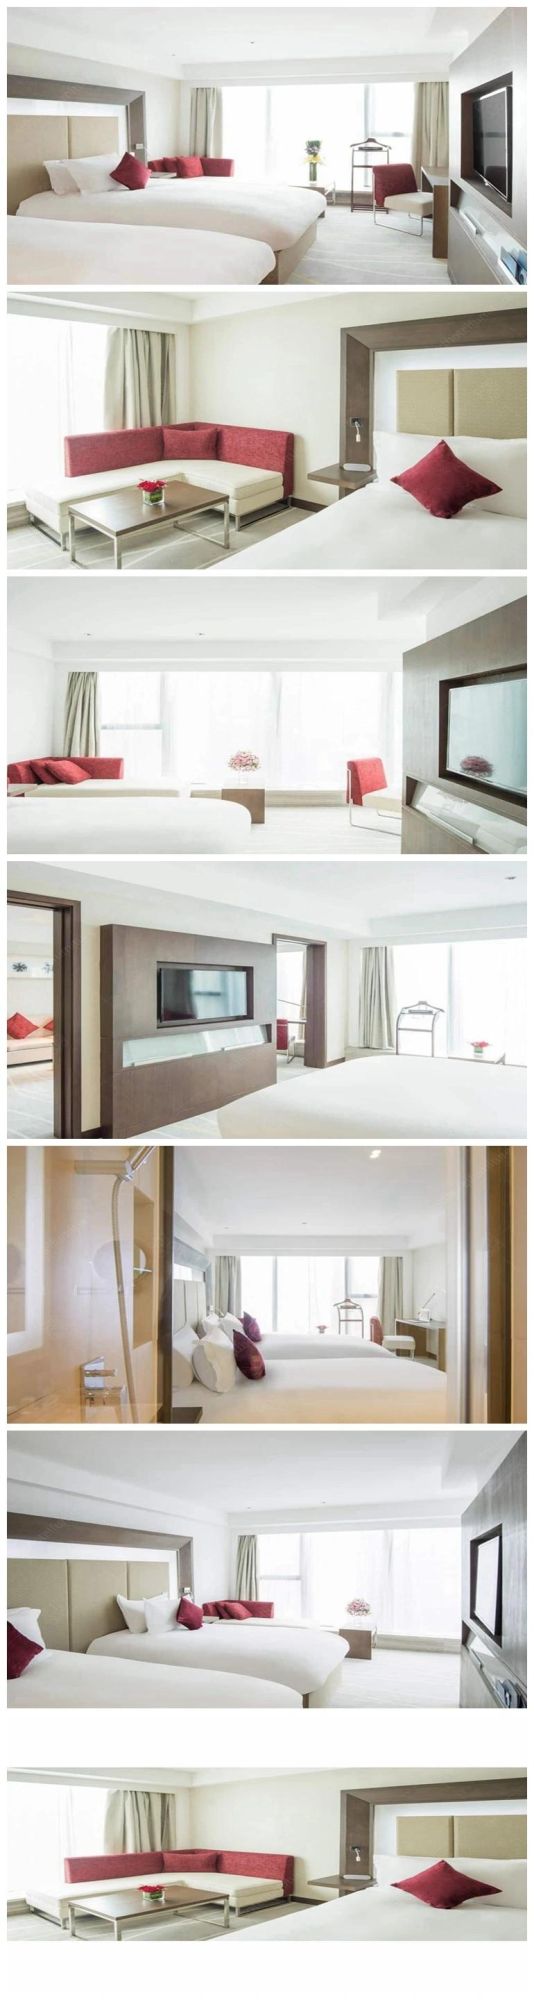 Hospitality Bedroom Use for Sale Malasia Hotel Furniture SD-1080